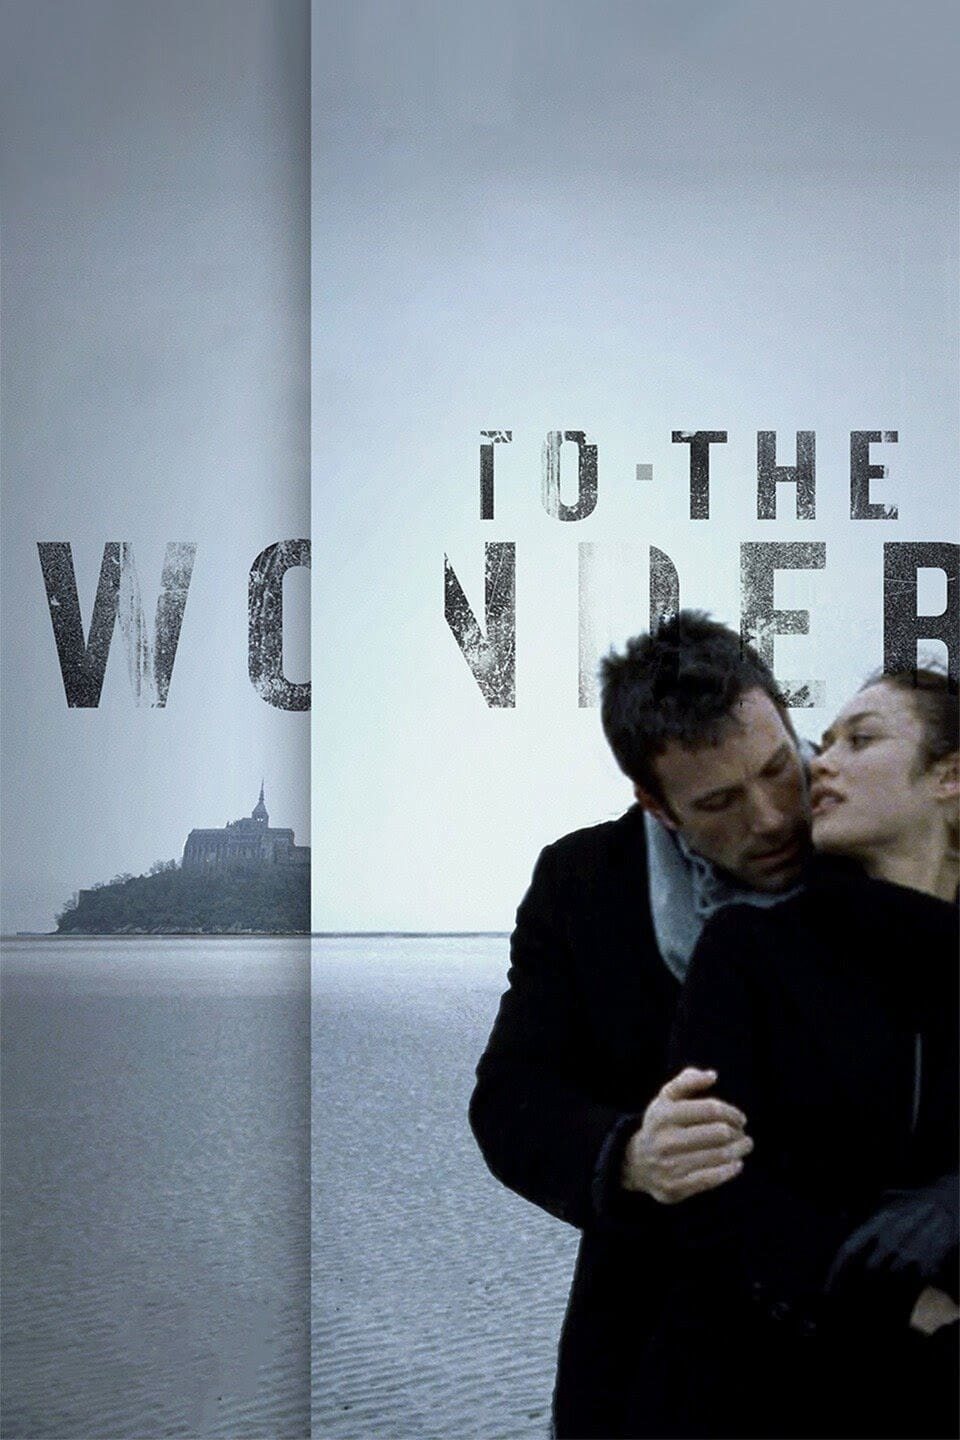 To the Wonder - To the Wonder (2012)